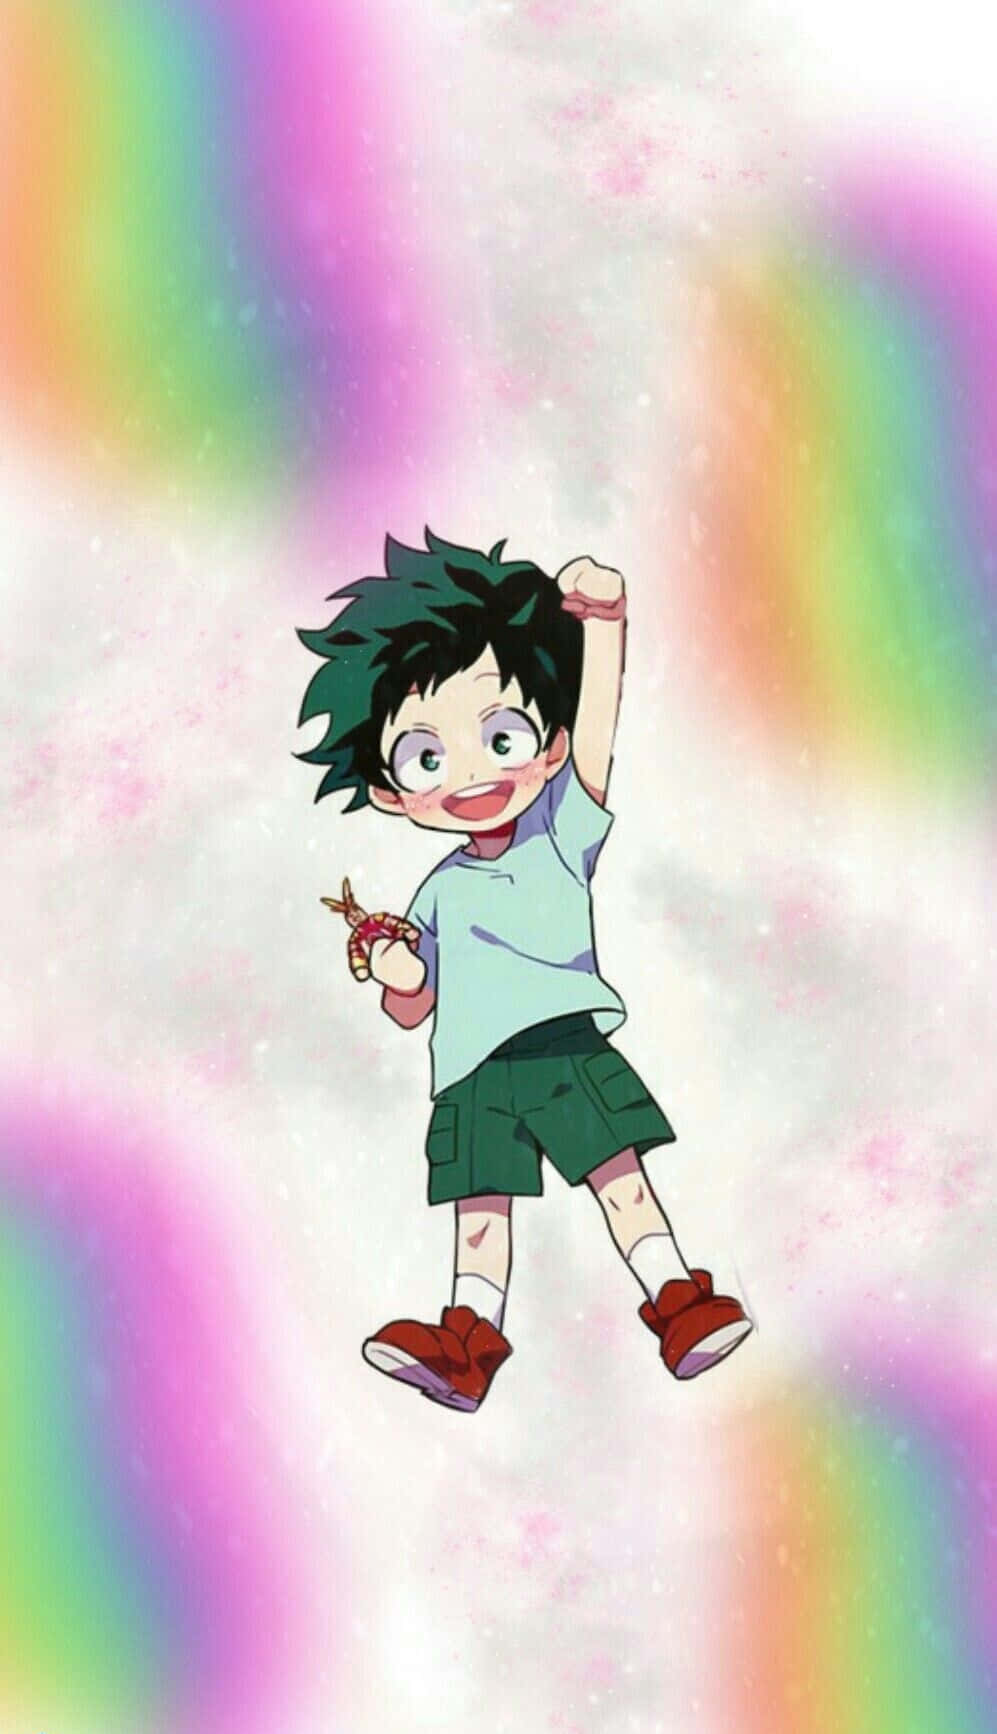 "Deku, Ready to Rise Above the Challenge" Wallpaper